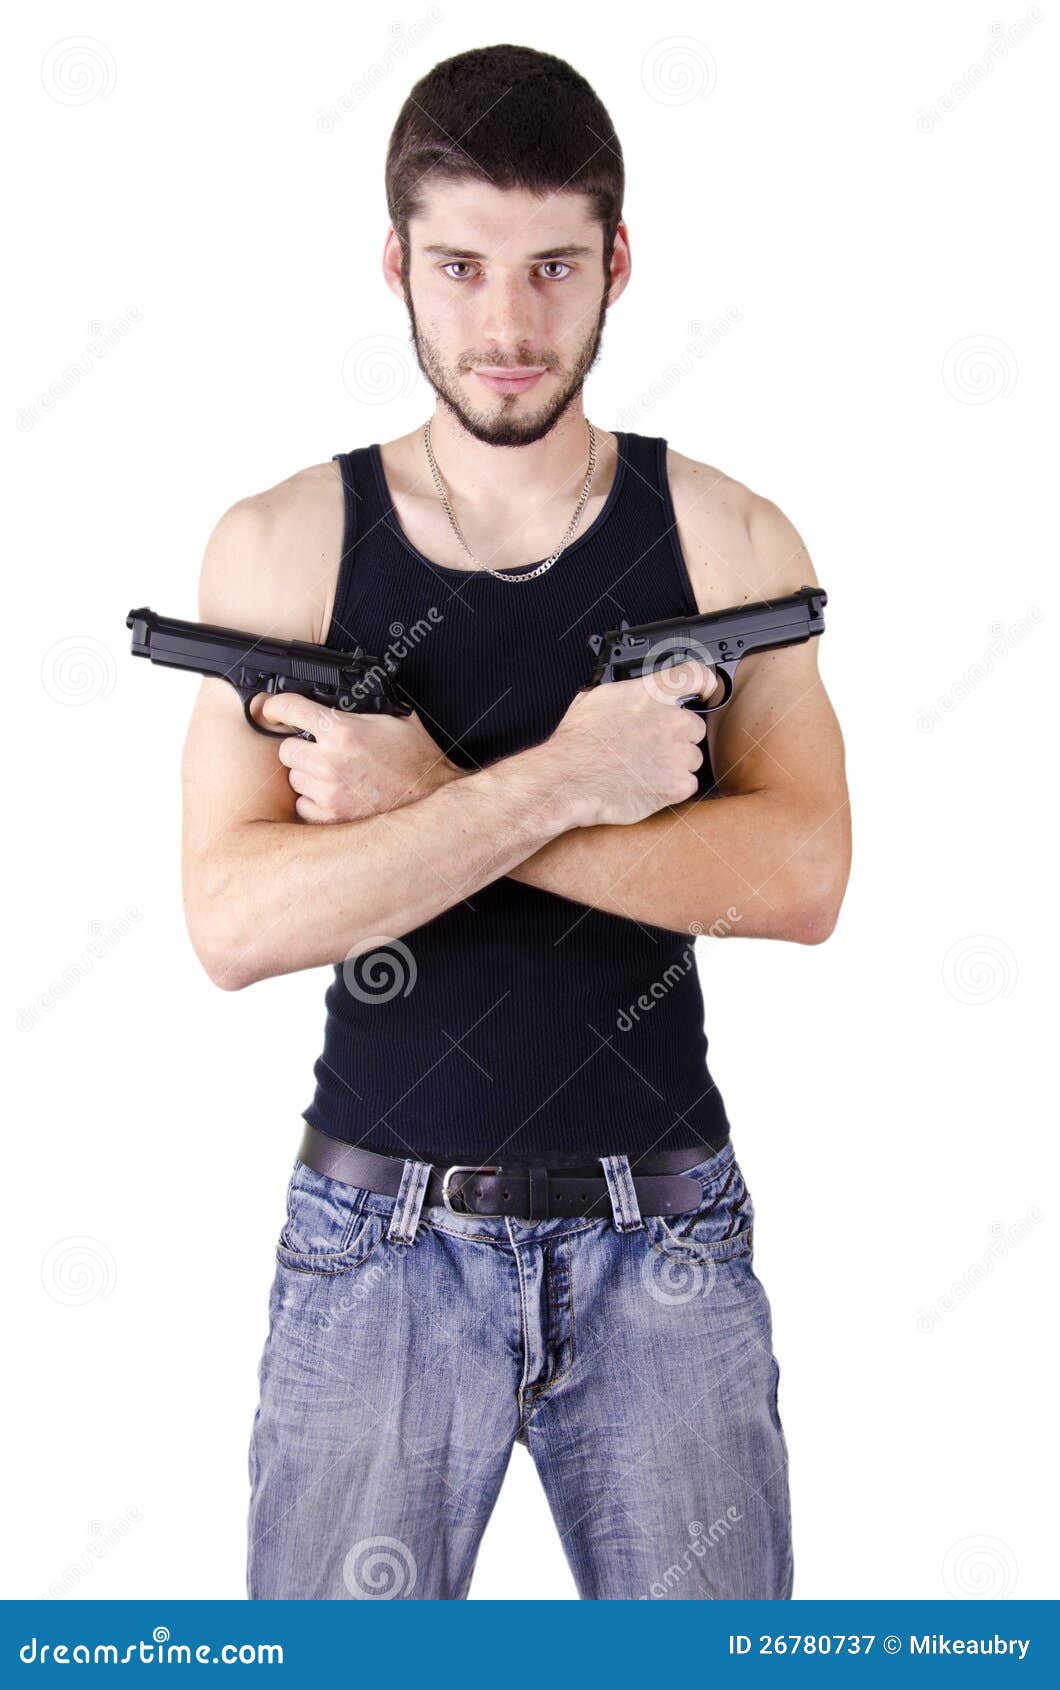 Man With Guns Royalty Free Stock Photography - Image: 26780737